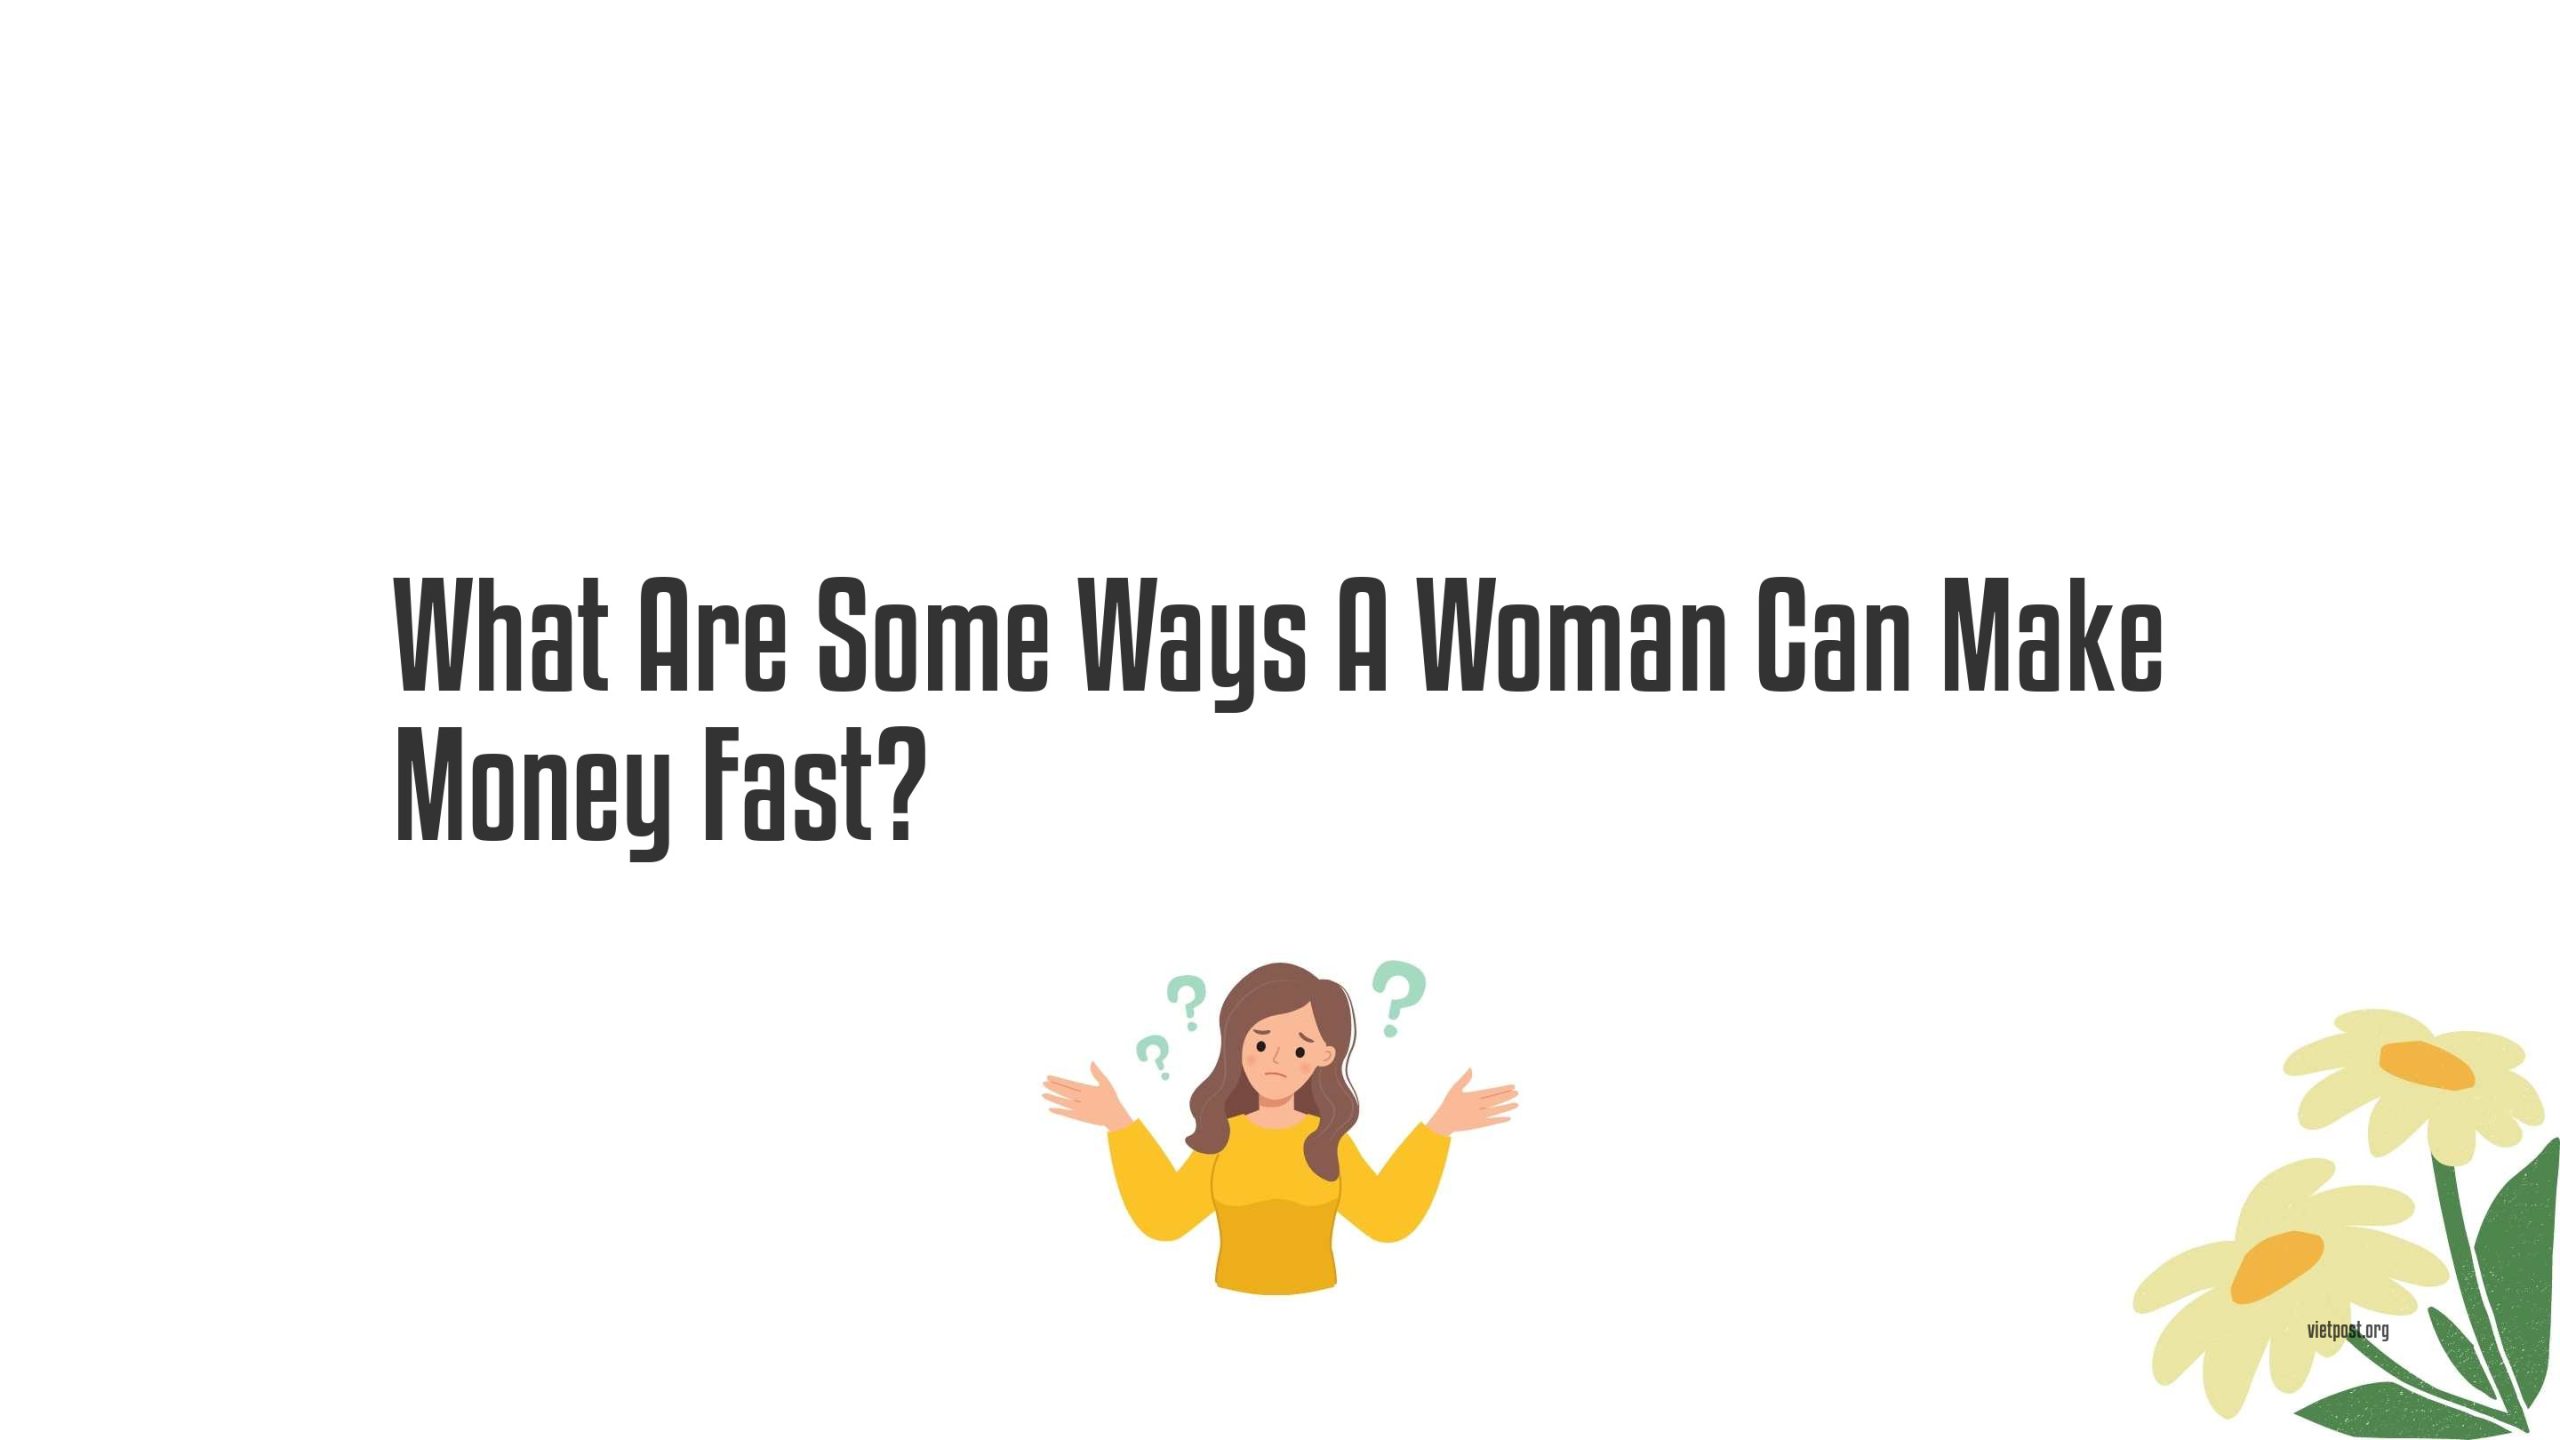 What Are Some Ways A Woman Can Make Money Fast?